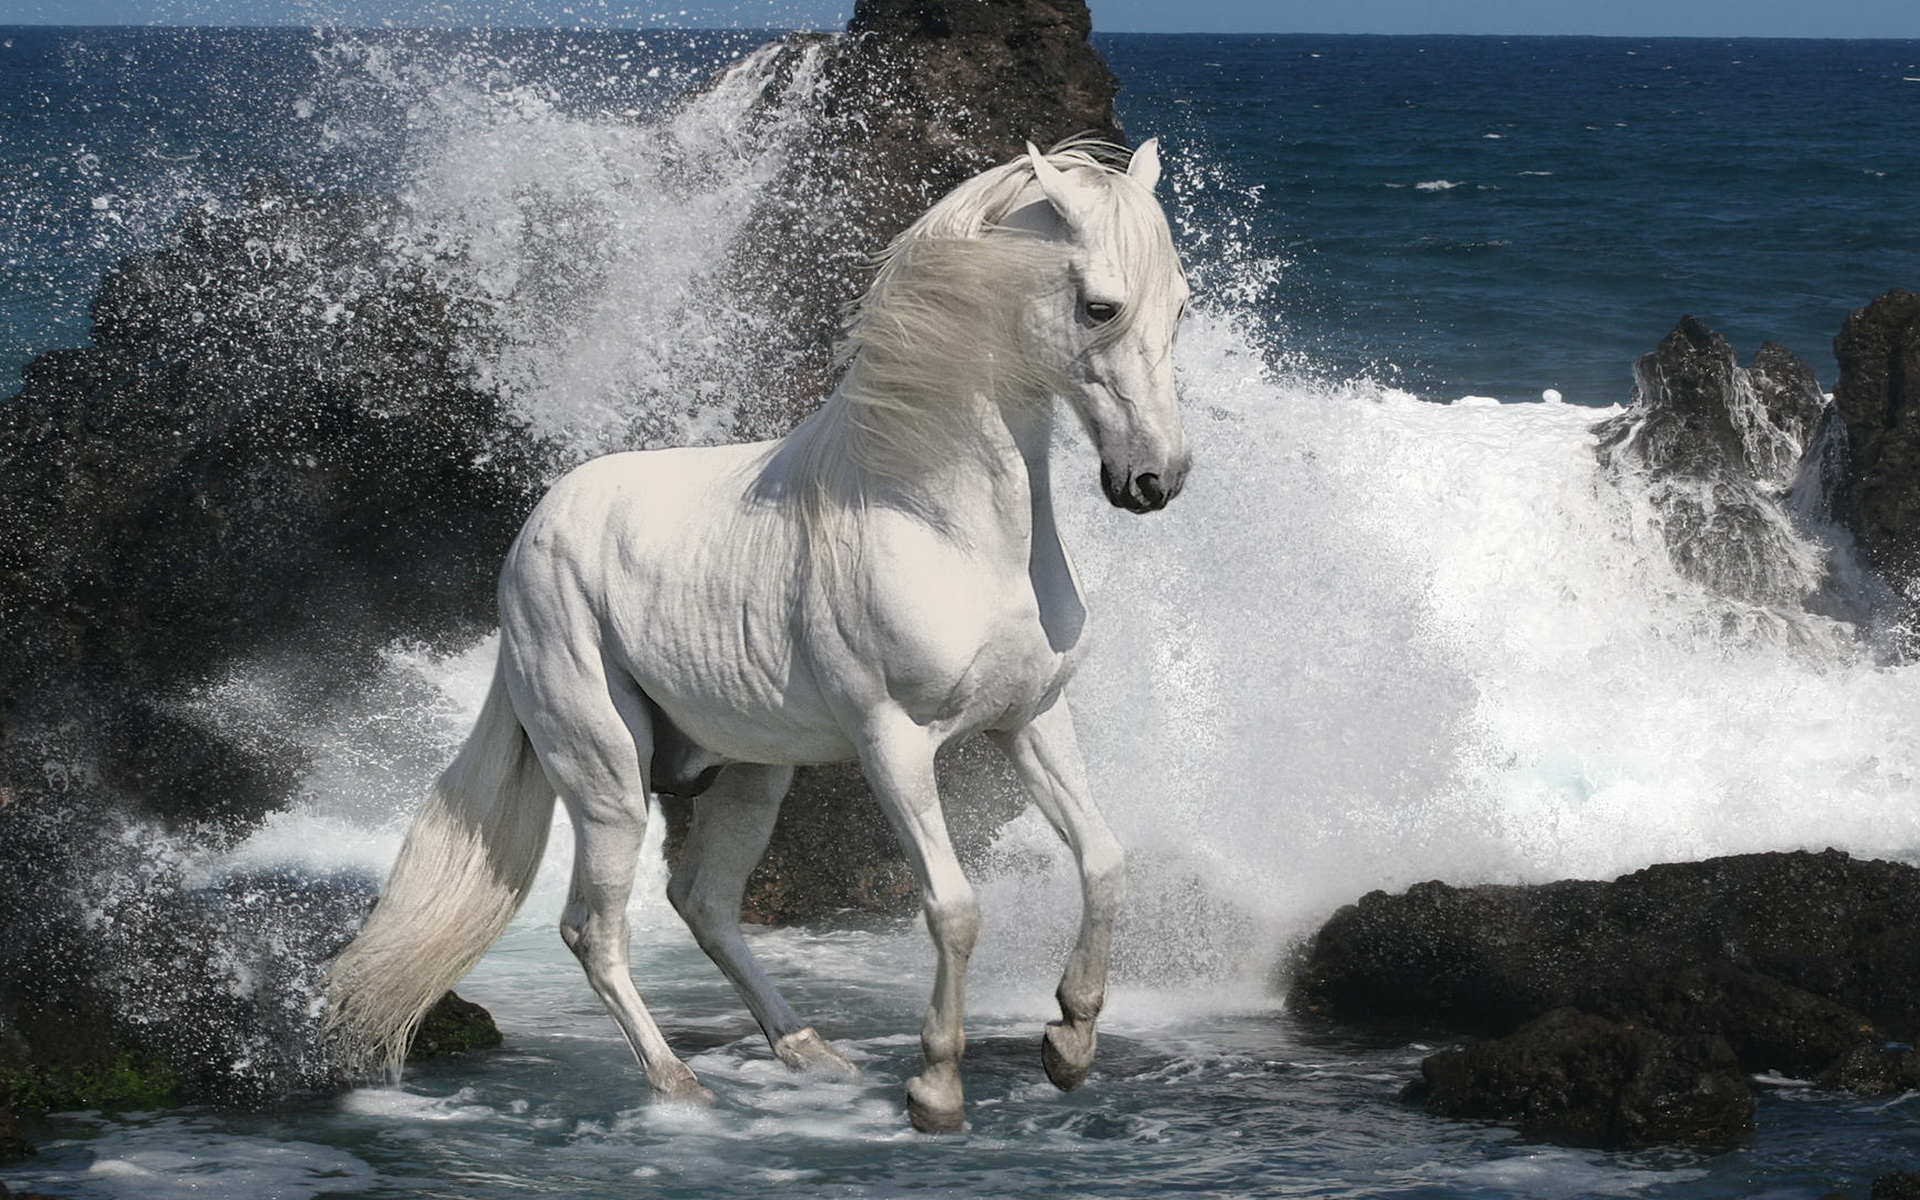 White stallion wallpapers and images - wallpapers, pictures, photos